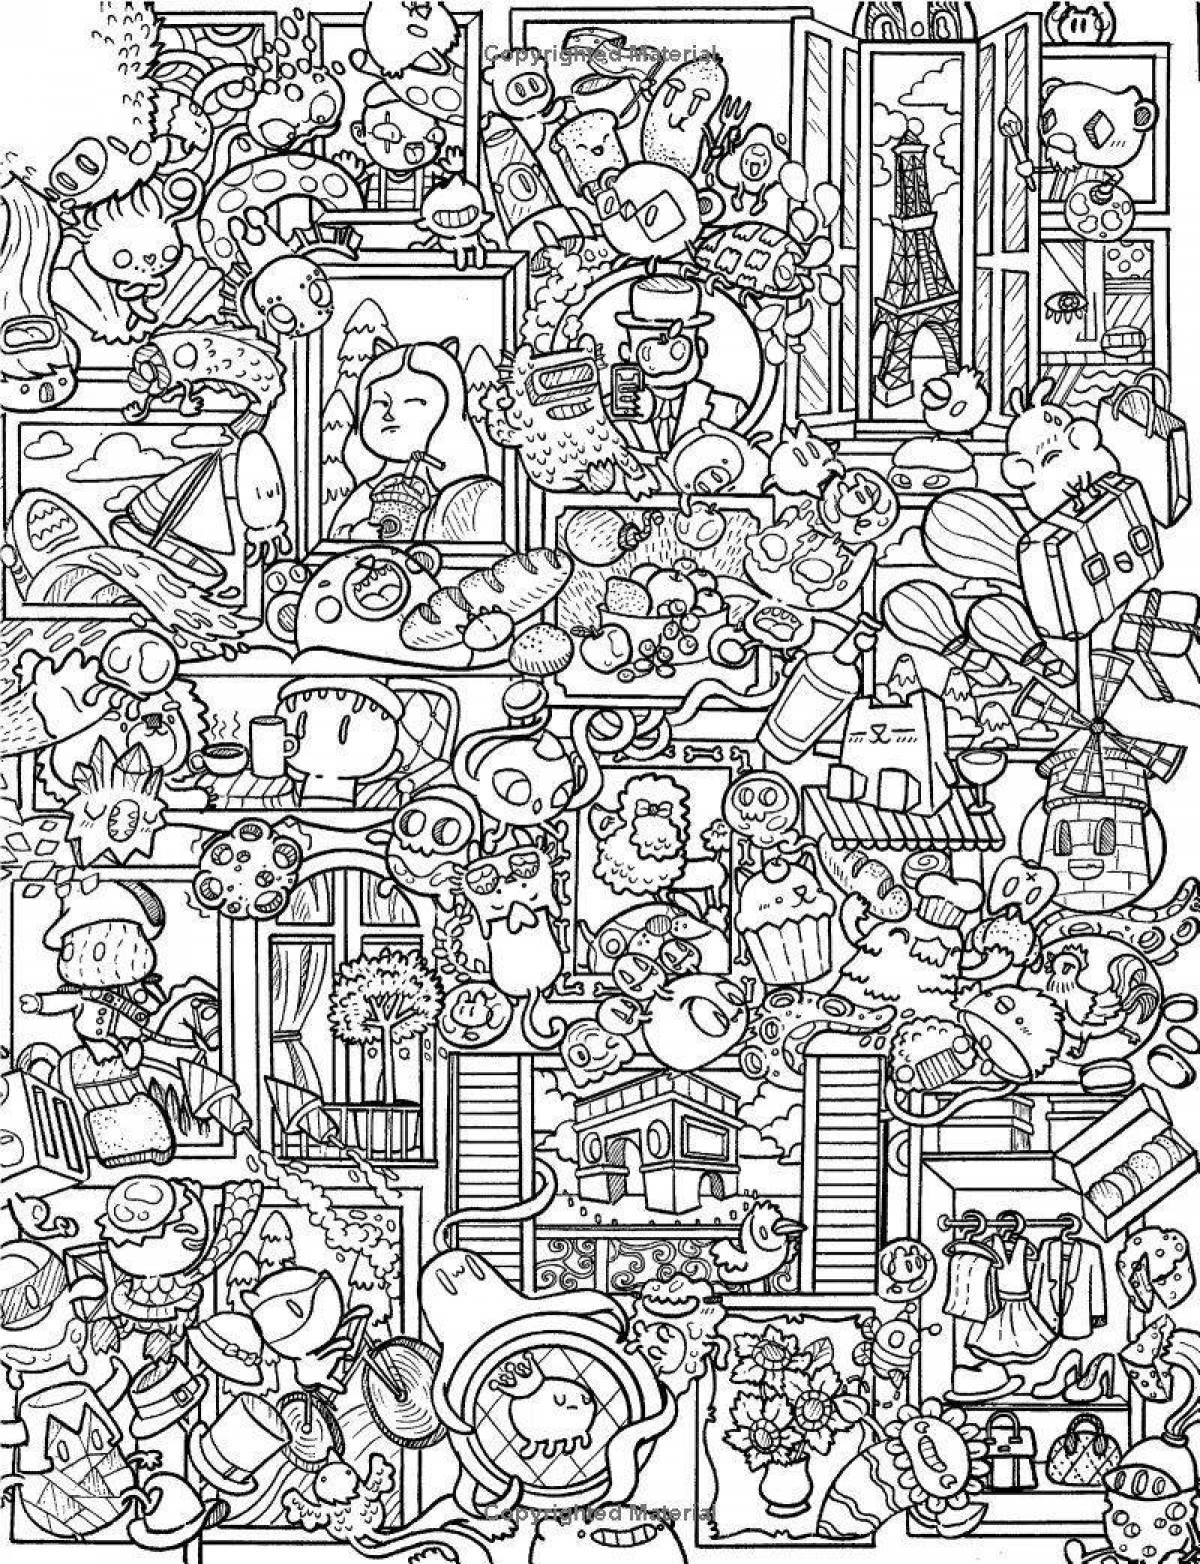 Large coloring page with many details